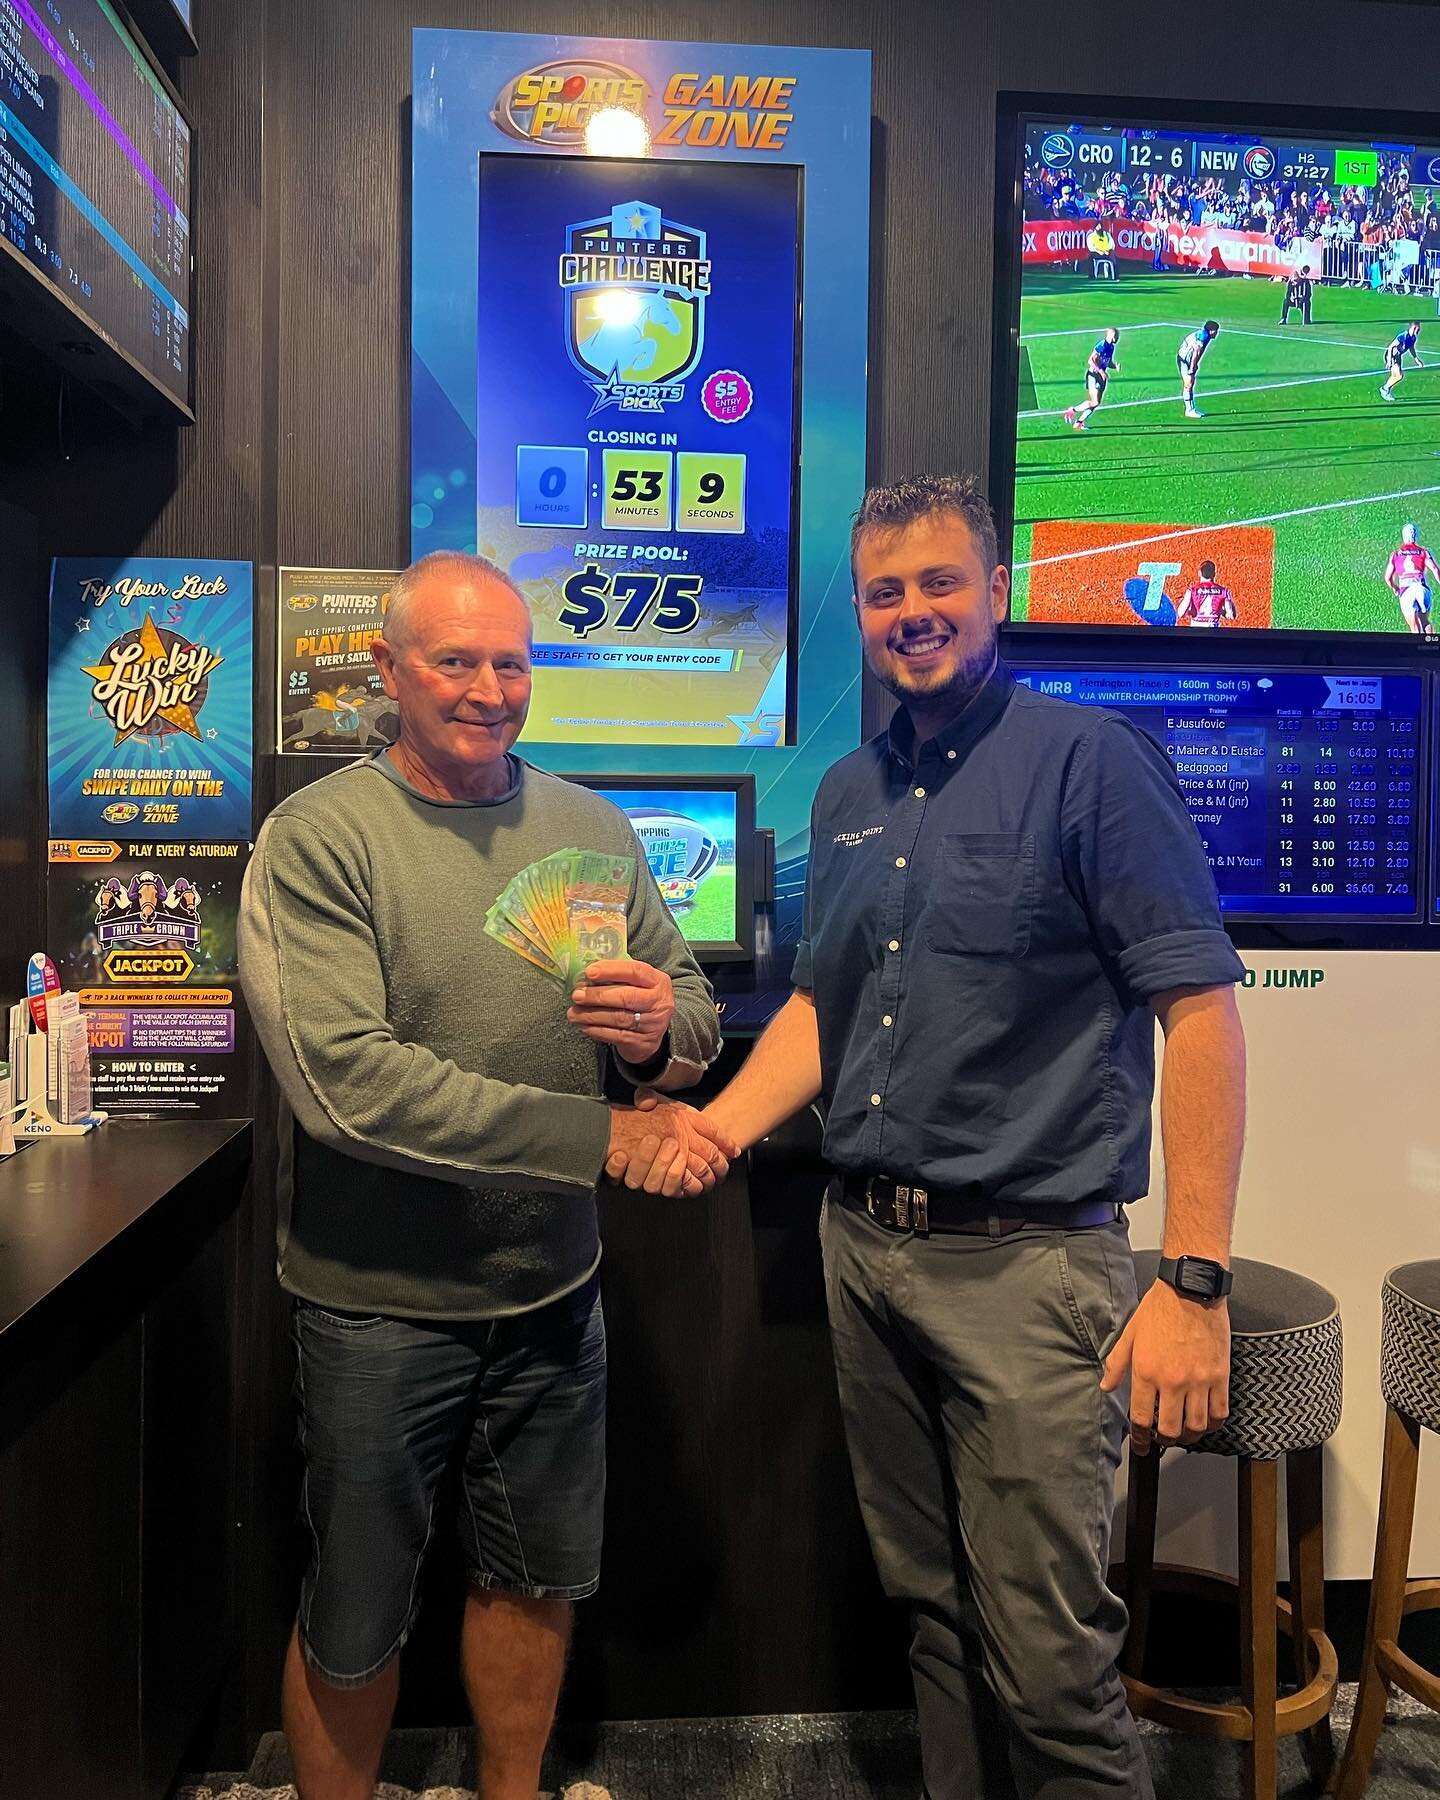 Congratulations Kevin, on winning the NRL Knockout challenge! tight completion so far this year. Greg, Jason, Cindy and Peter all battling it out in top spot 🏈

#nrl #knockout #tackingpointtavern